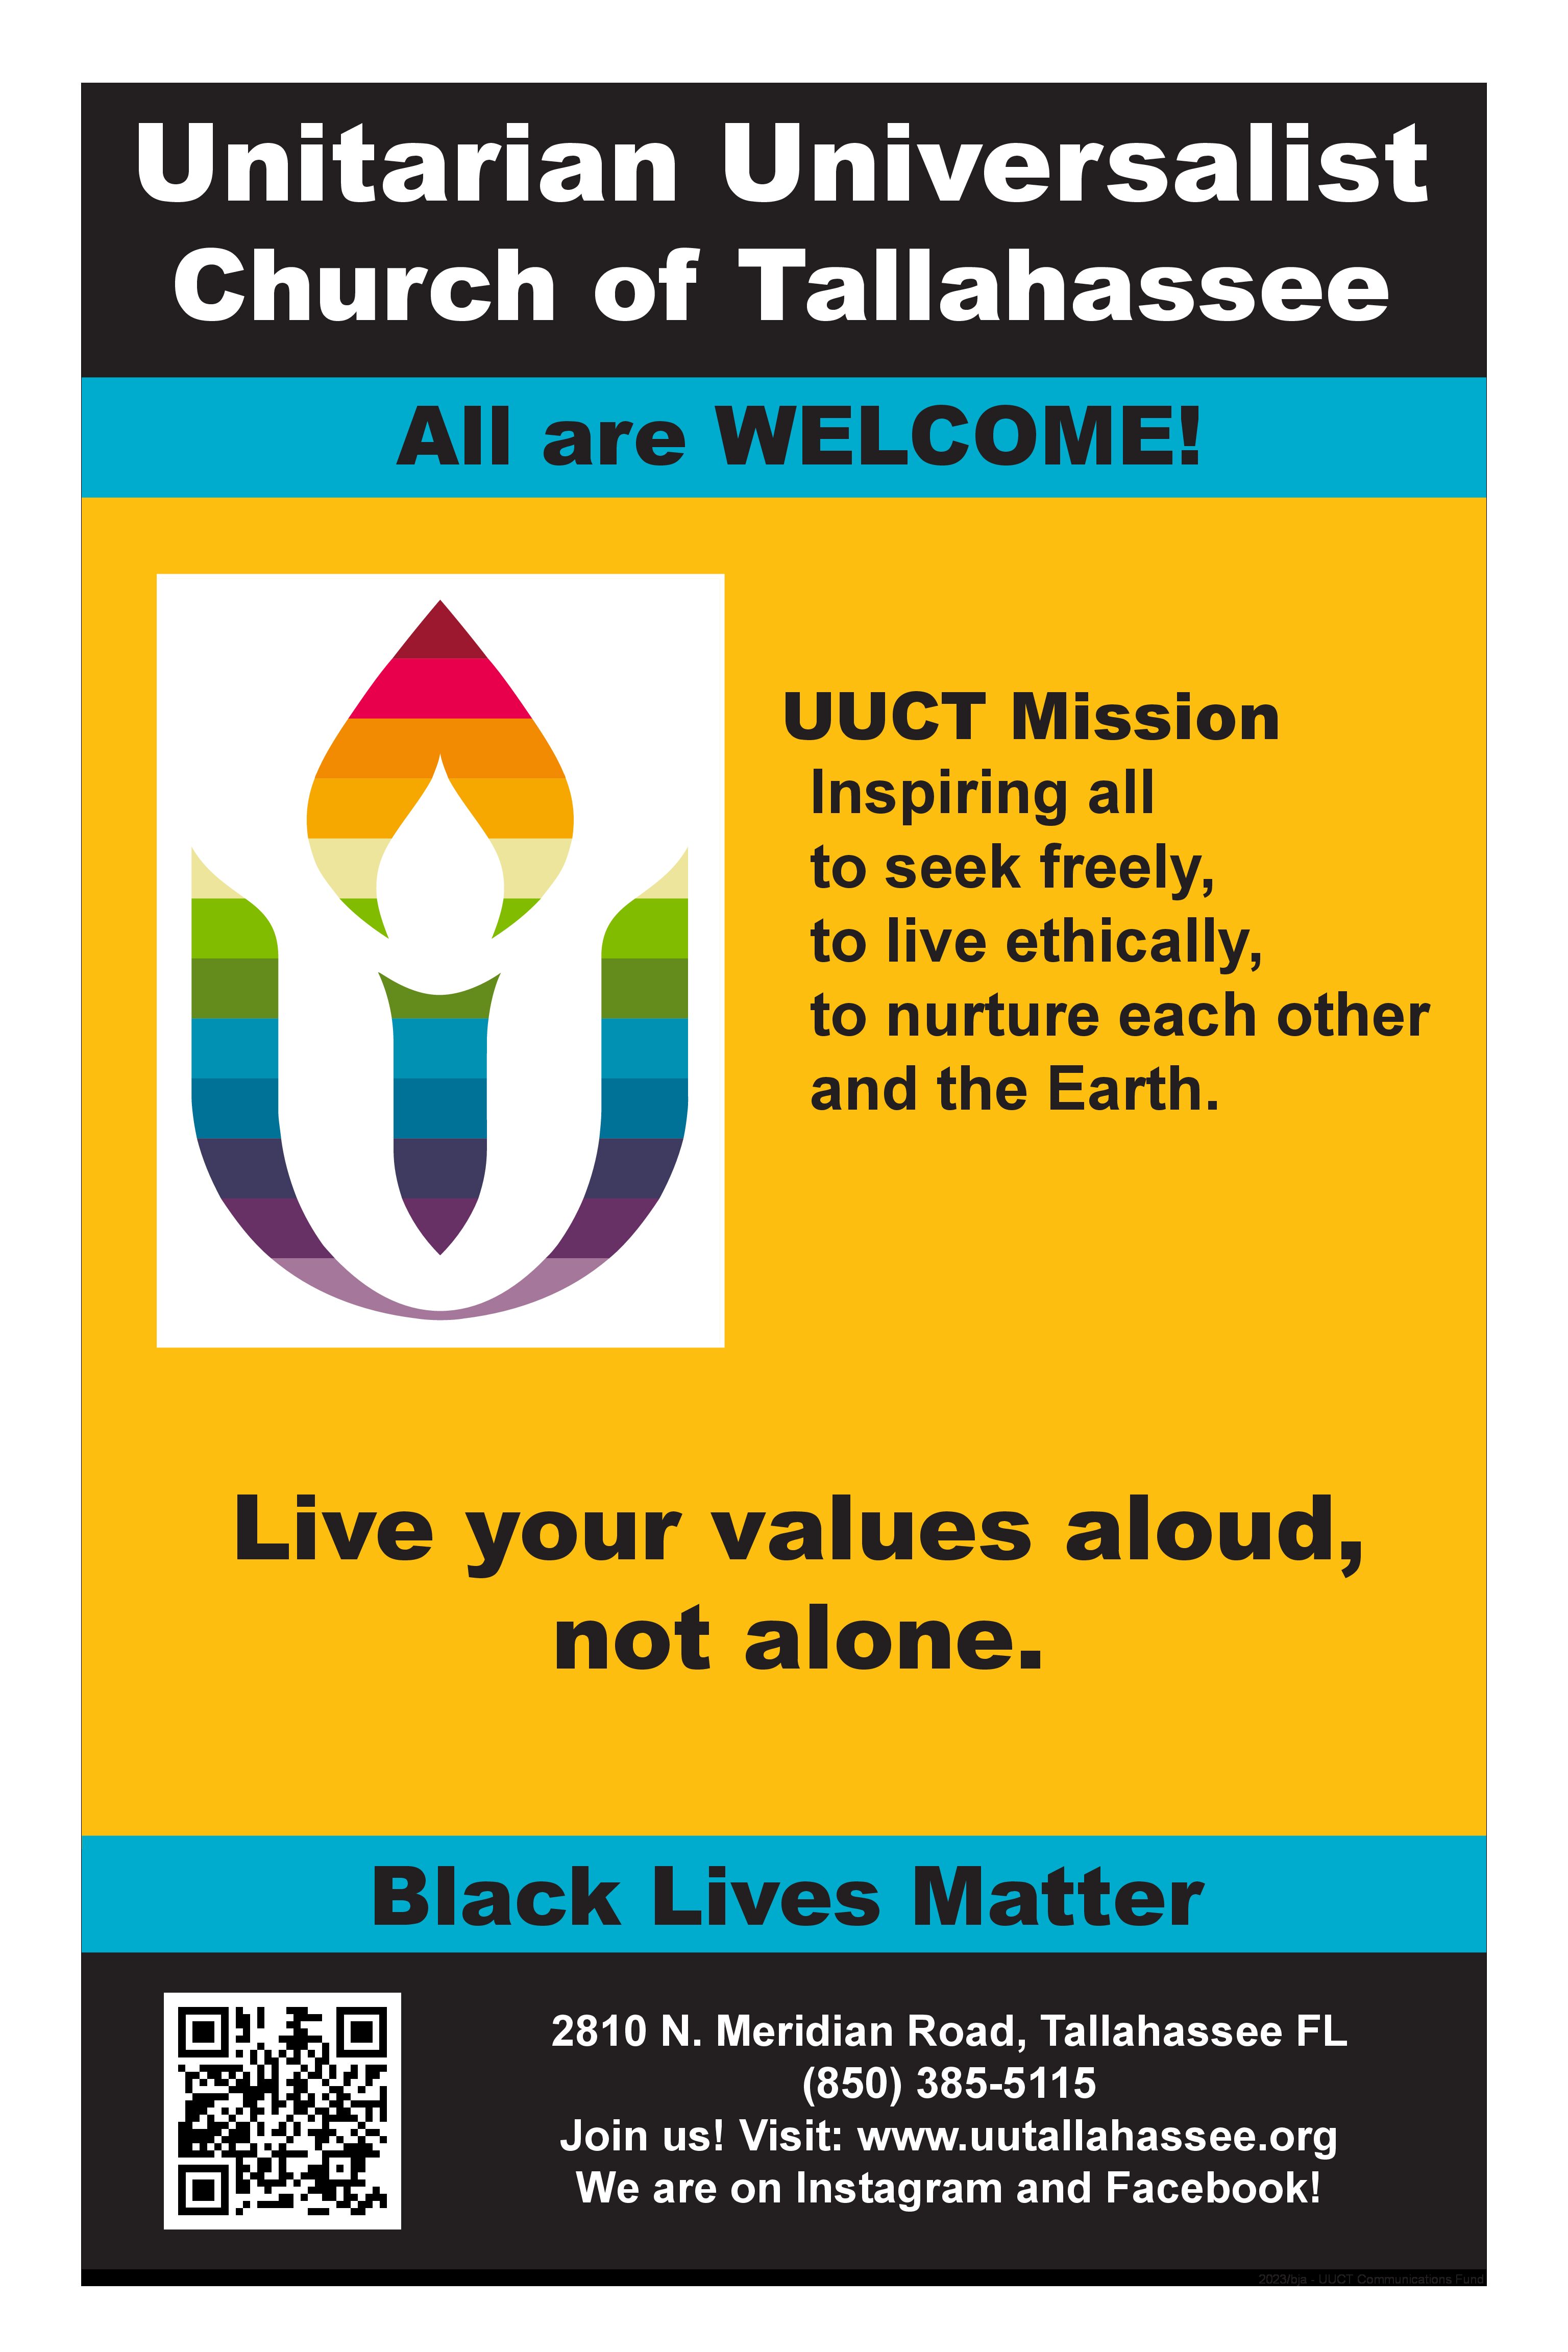 UUCT Outreach Resources Available